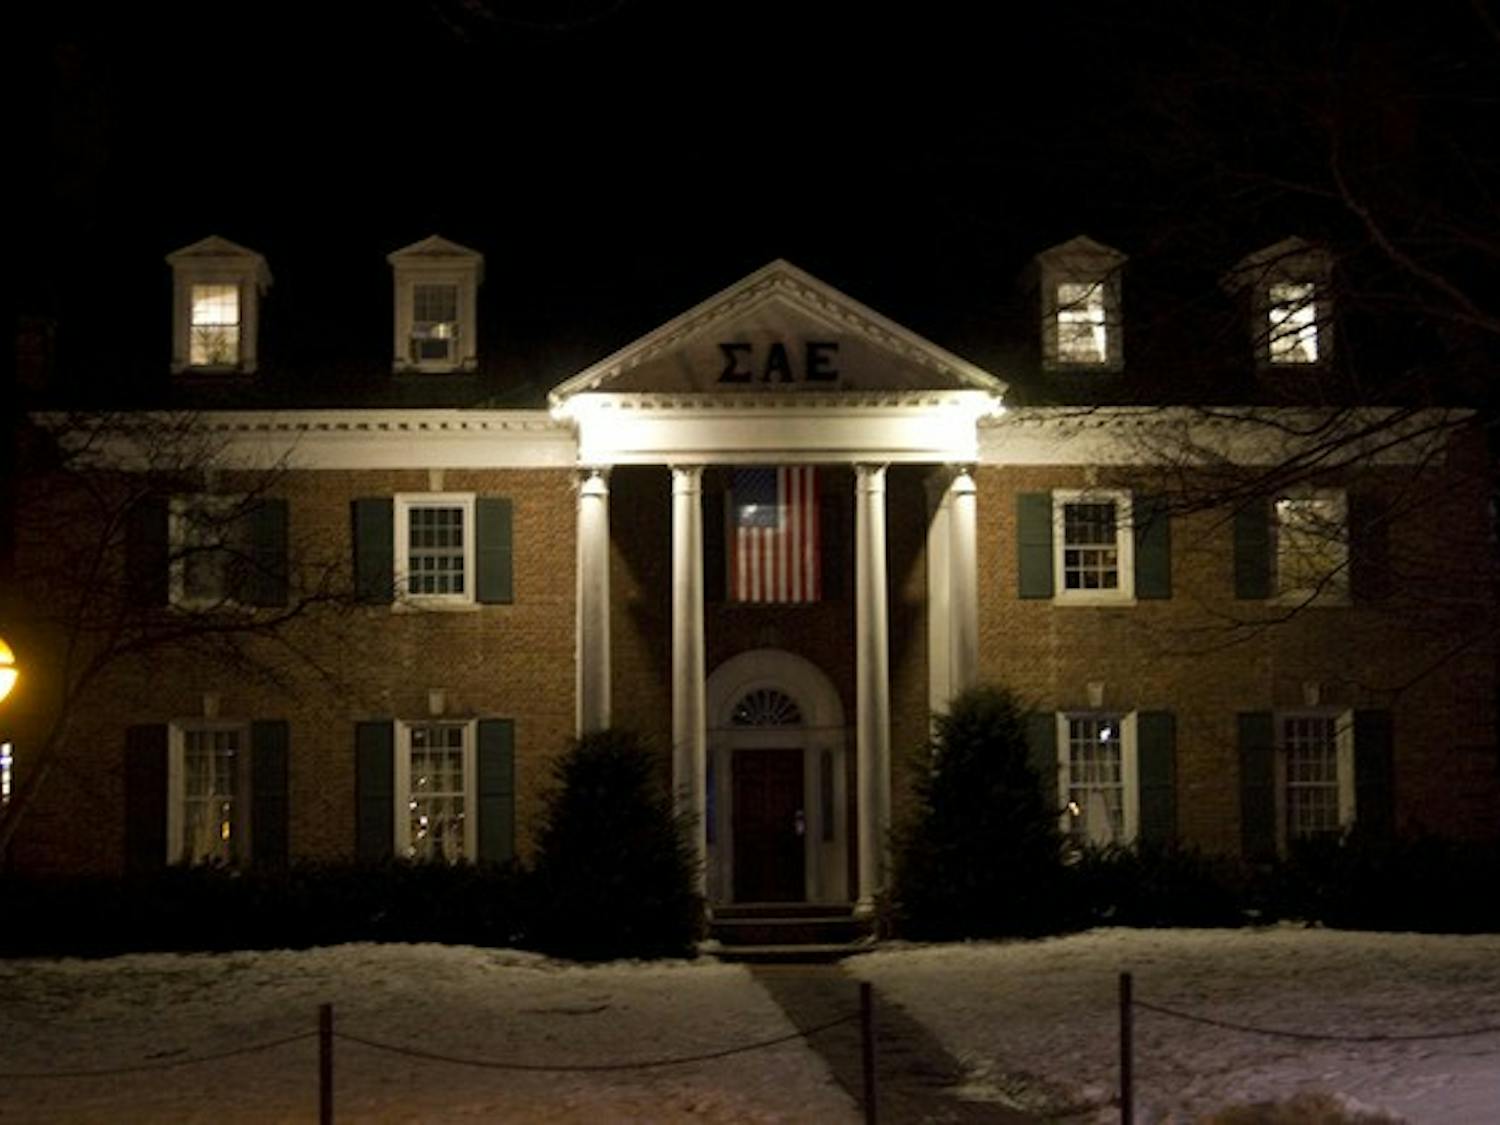 Andrew Lohse '12 has accused the College of taking inadequate action in response to his allegations of hazing at his former fraternity, Sigma Alpha Epsilon.